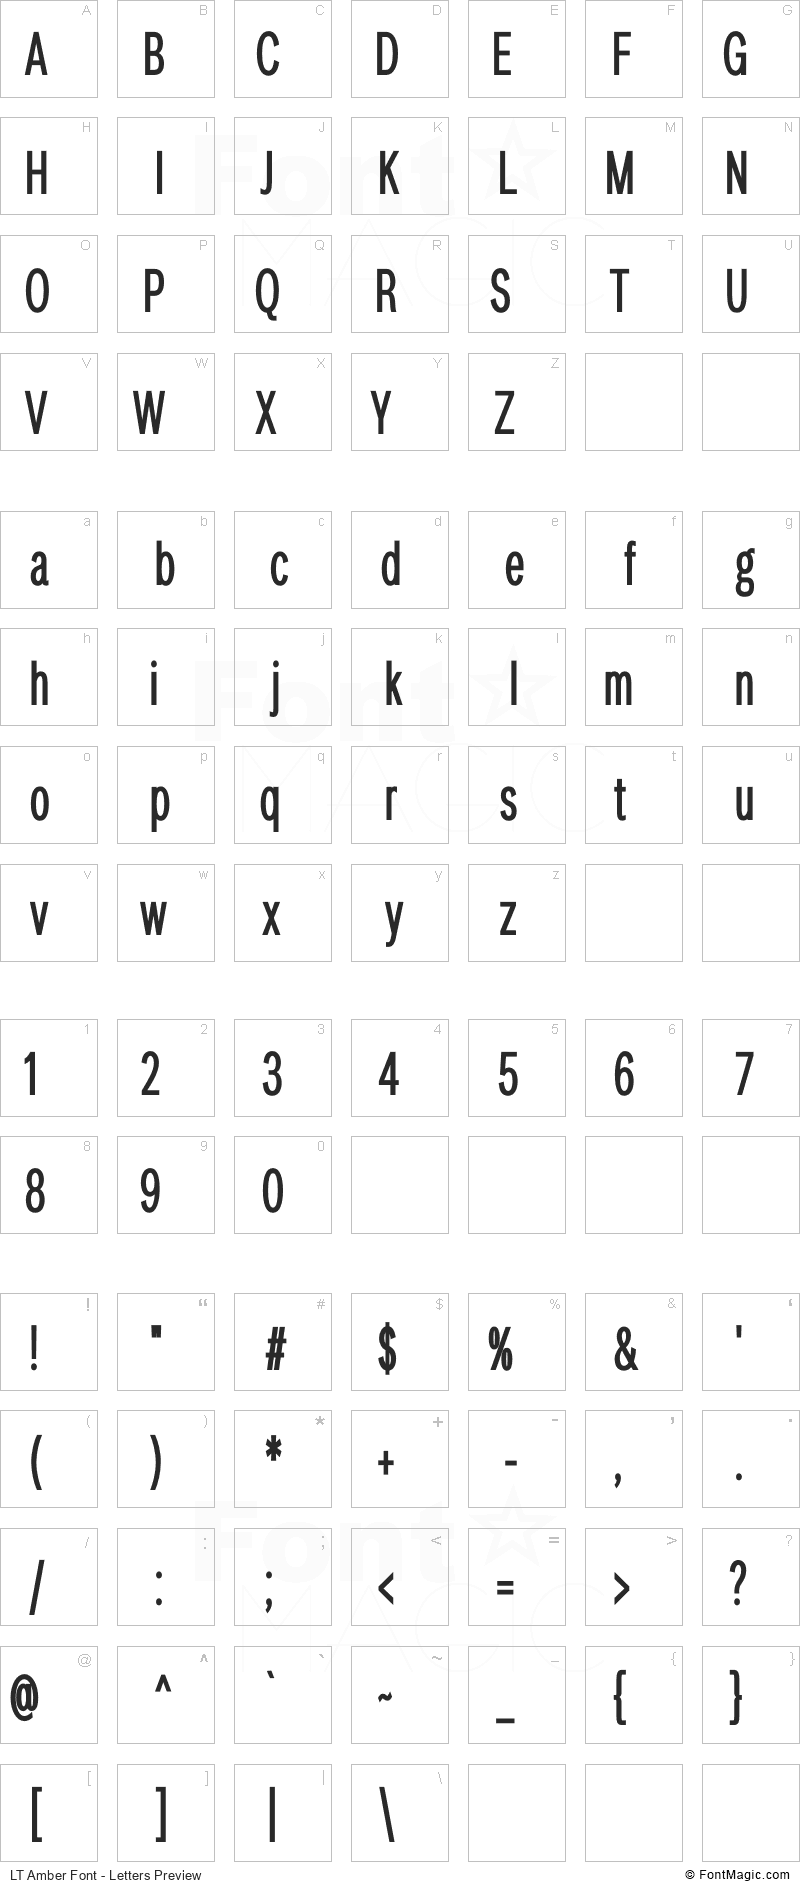 LT Amber Font - All Latters Preview Chart